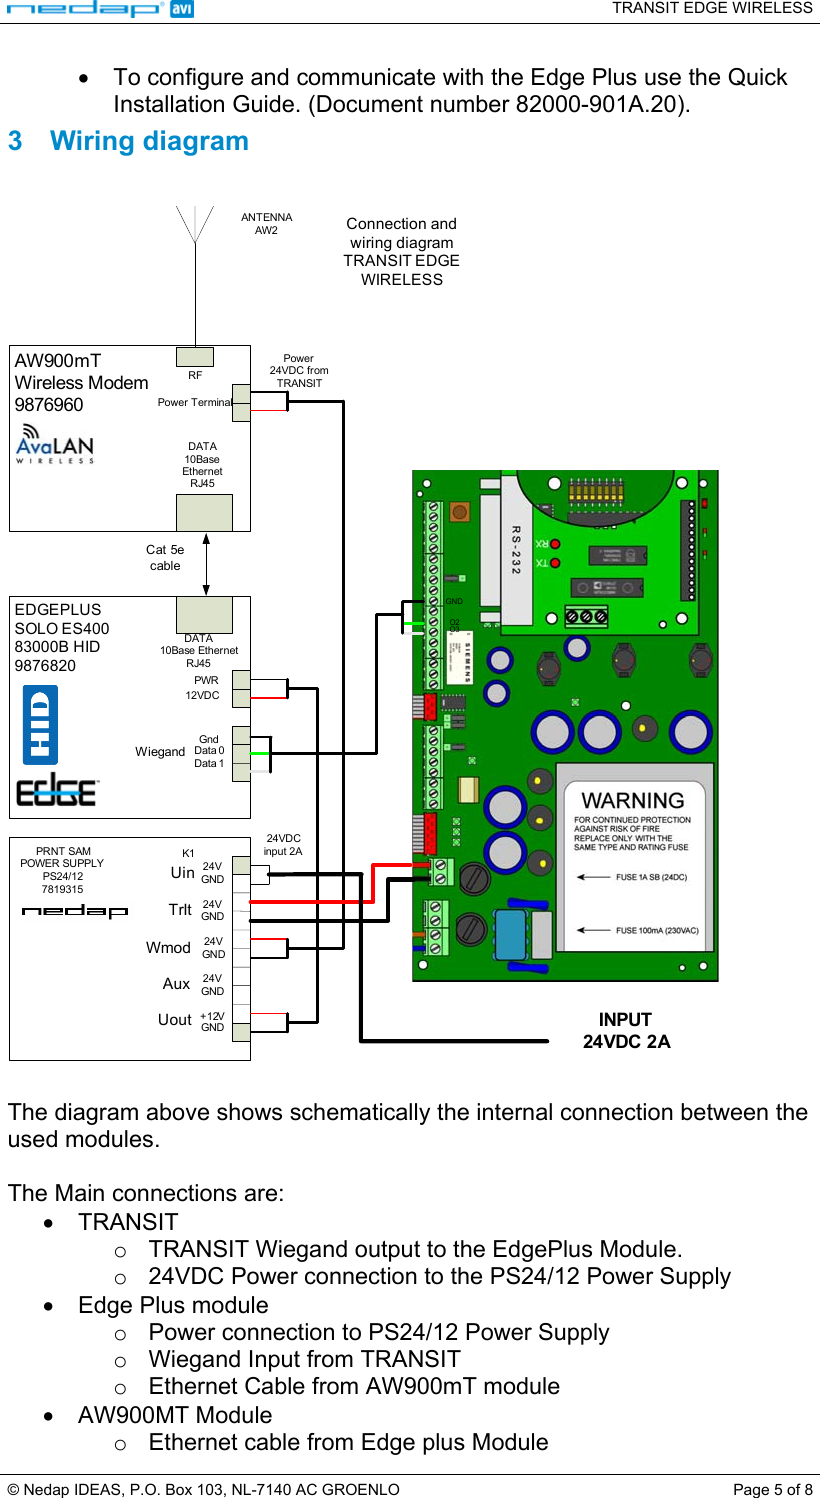   TRANSIT EDGE WIRELESS  © Nedap IDEAS, P.O. Box 103, NL-7140 AC GROENLO  Page 5 of 8 •  To configure and communicate with the Edge Plus use the Quick Installation Guide. (Document number 82000-901A.20).  3  Wiring diagram  AW900mTWireless Modem9876960Power TerminalPower 24VDC from TRANSITRFDATA10Base EthernetRJ45ANTENNAAW2EDGEPLUS SOLO ES40083000B HID 9876820PWRGndData 0Data 112VDCDATA10Base EthernetRJ45WiegandCat 5e cableUinPRNT SAM POWER SUPPLYPS24/127819315TrItWmodAuxUout24VDC input 2AK124VGND24VGND24VGND24VGND+12VGNDGNDO2O3Connection and wiring diagramTRANSIT EDGE WIRELESS INPUT 24VDC 2AThe diagram above shows schematically the internal connection between the used modules.   The Main connections are: •  TRANSIT o  TRANSIT Wiegand output to the EdgePlus Module. o  24VDC Power connection to the PS24/12 Power Supply •  Edge Plus module o  Power connection to PS24/12 Power Supply o  Wiegand Input from TRANSIT o  Ethernet Cable from AW900mT module •  AW900MT Module o  Ethernet cable from Edge plus Module 